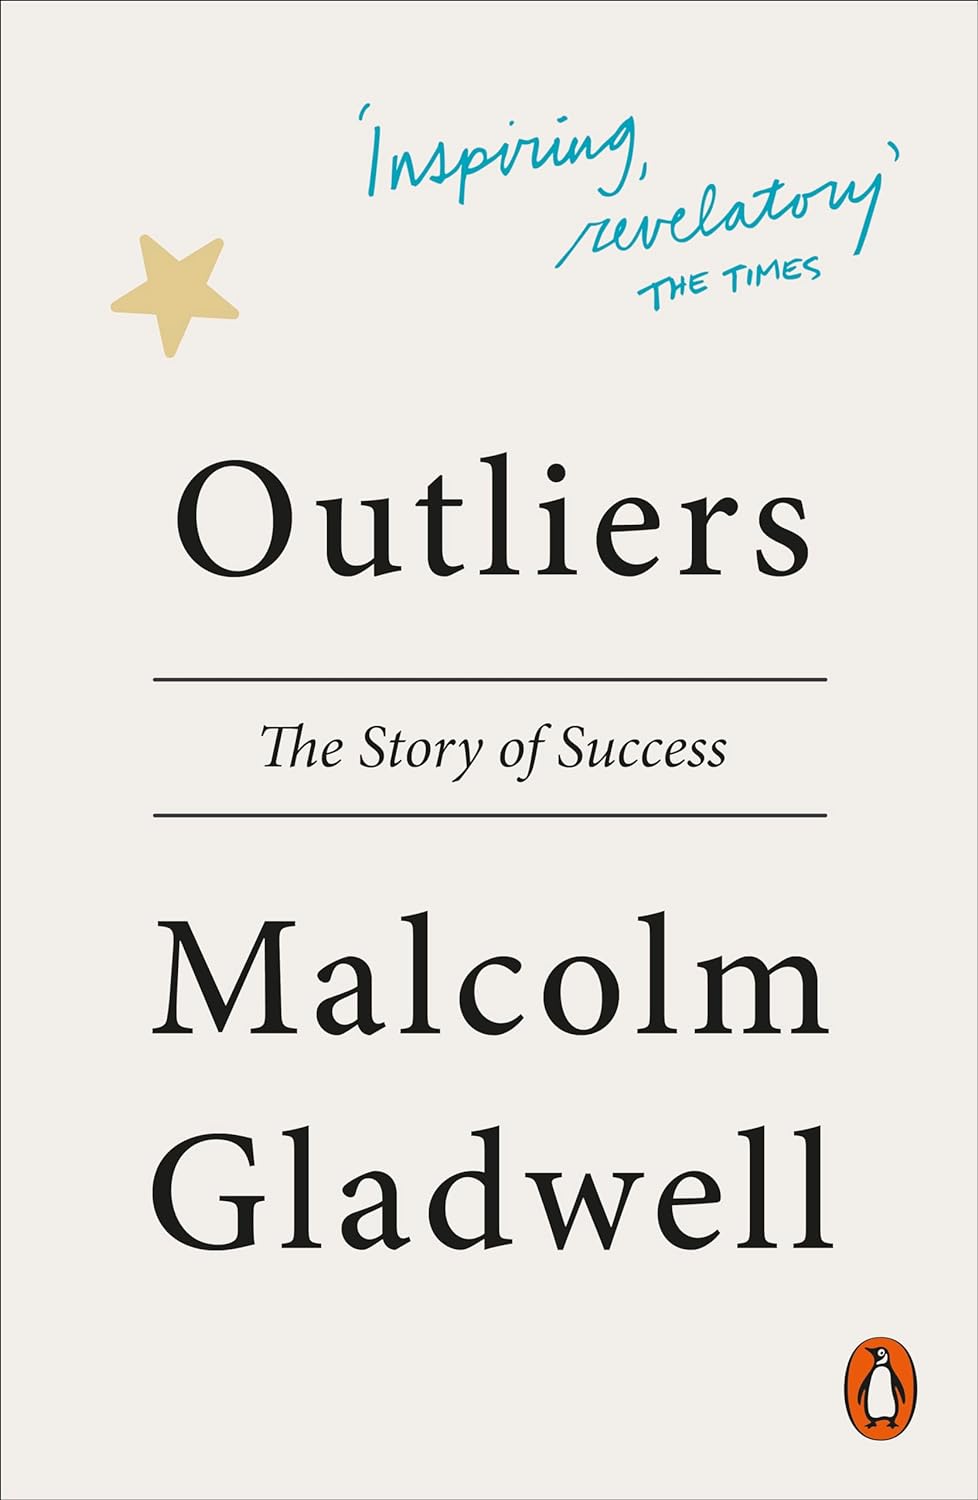 Sách Ngoại Văn - OUTLIERS (Paperback by Malcolm Gladwell (Author))